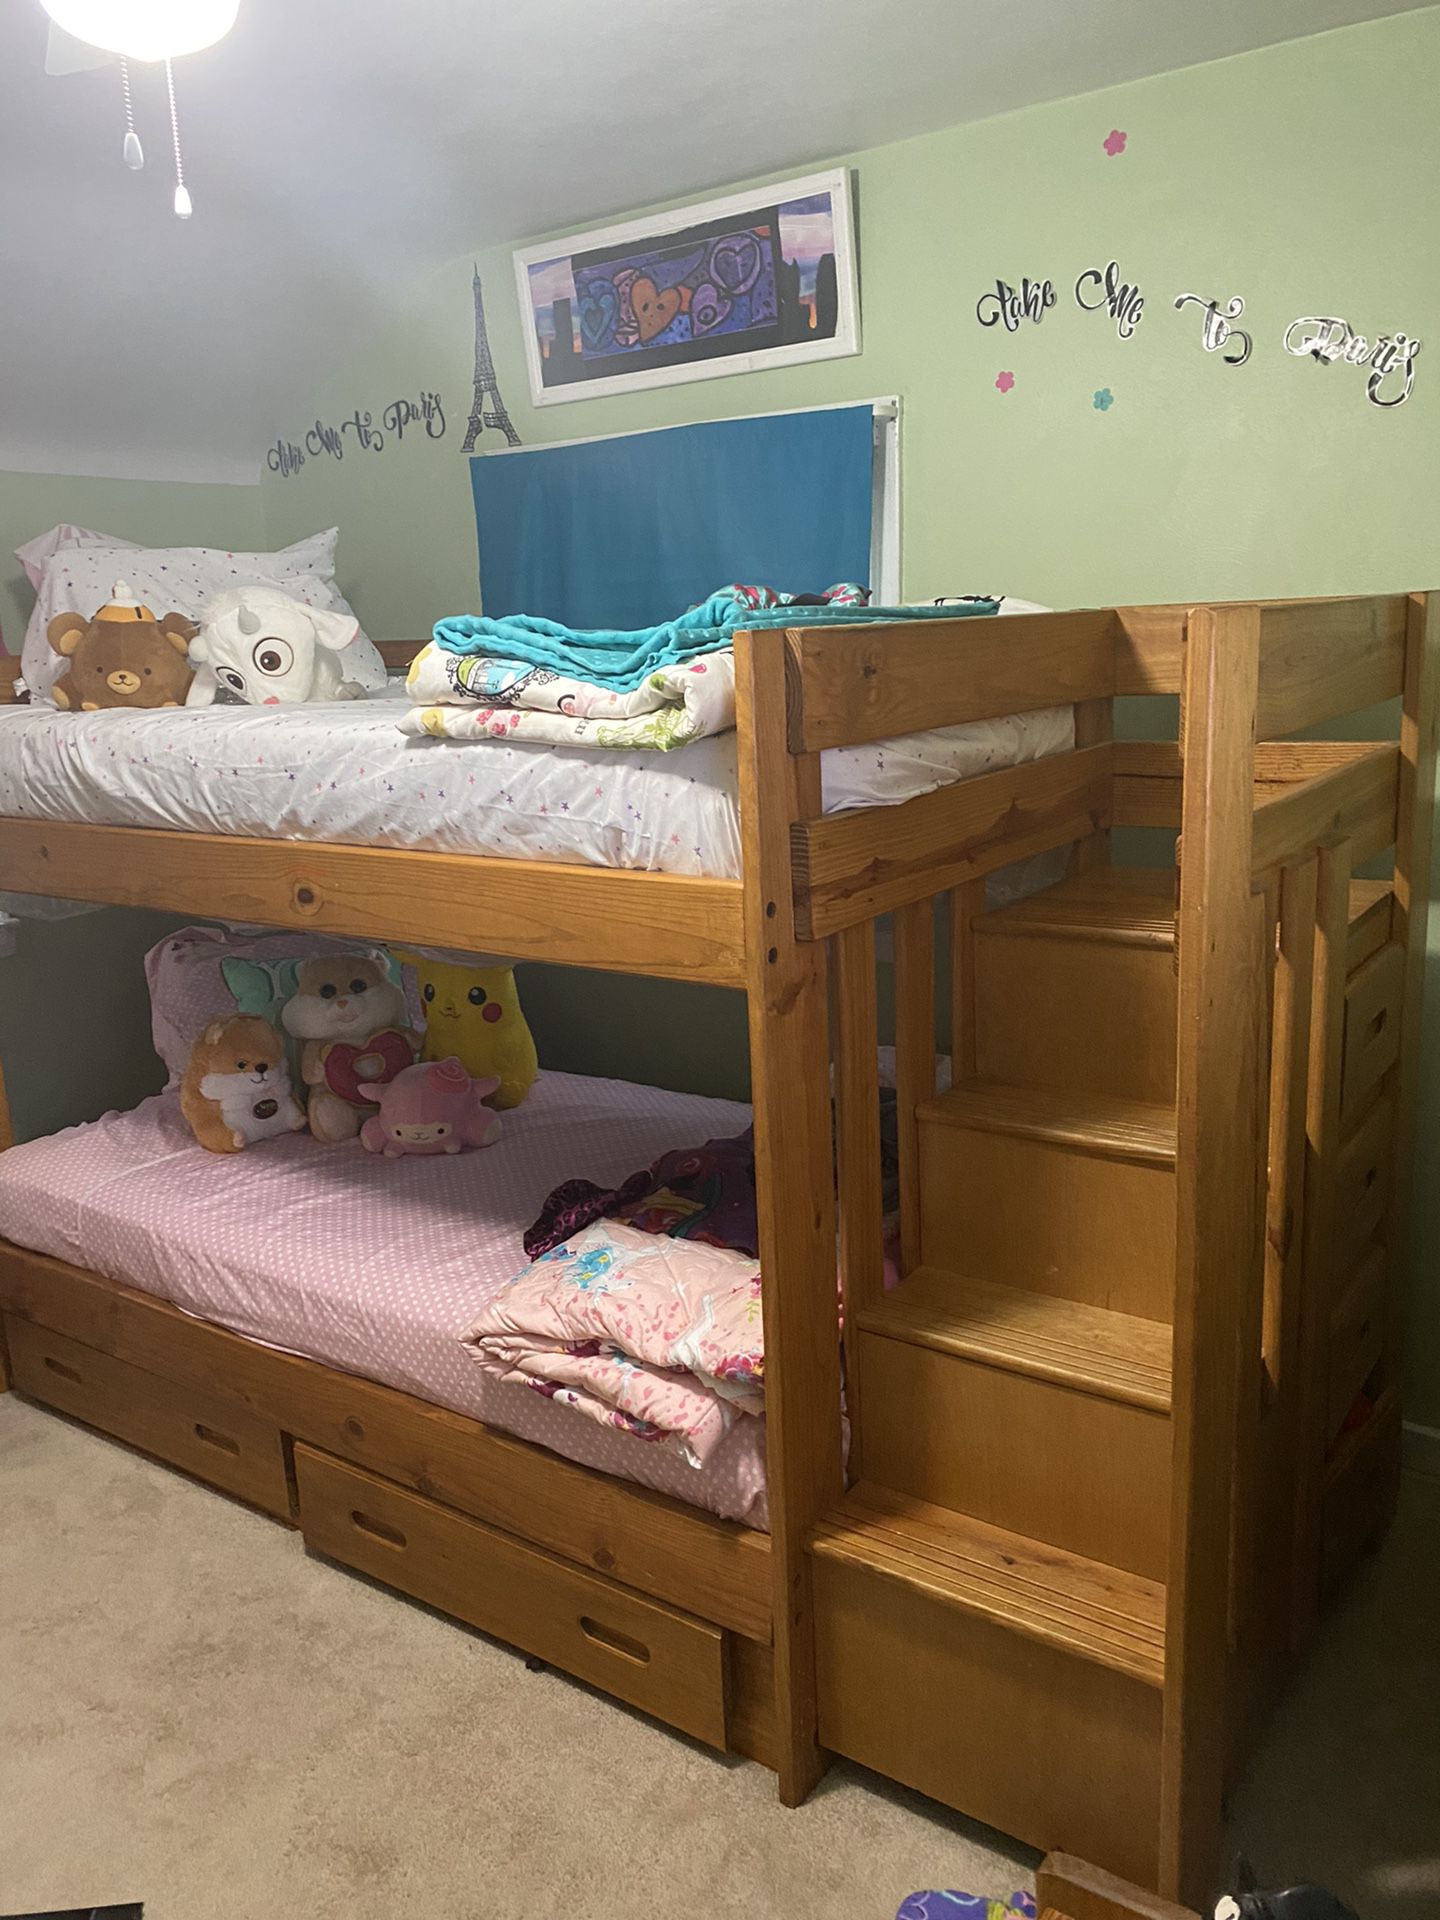 Solid wood beds bunk beds with drawers on the side in at the bottom in very good condition...